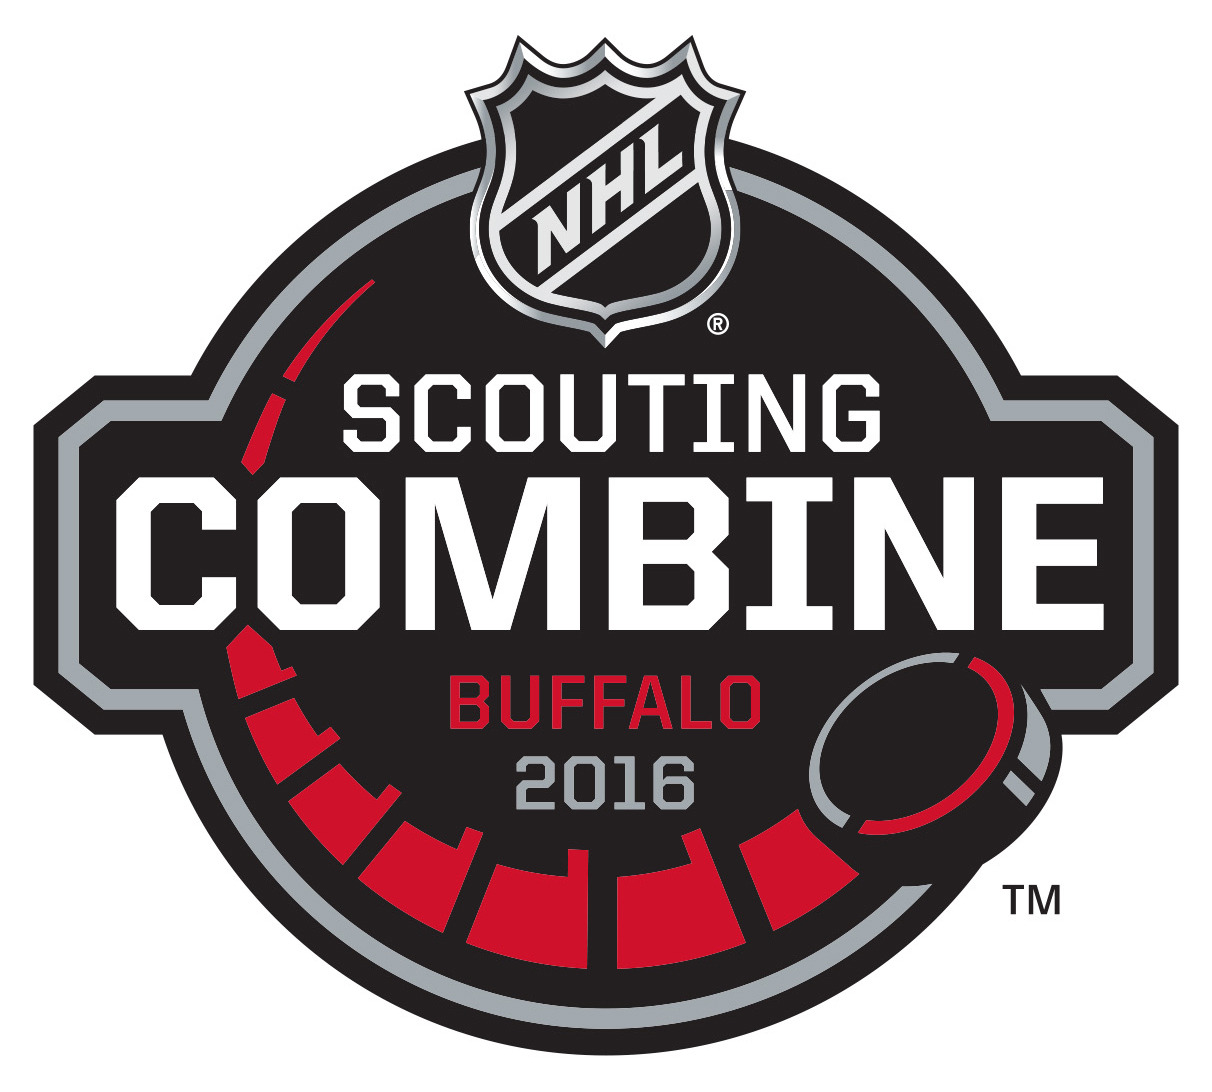 2016 NHL SCOUTING COMBINE LIST ANNOUNCED